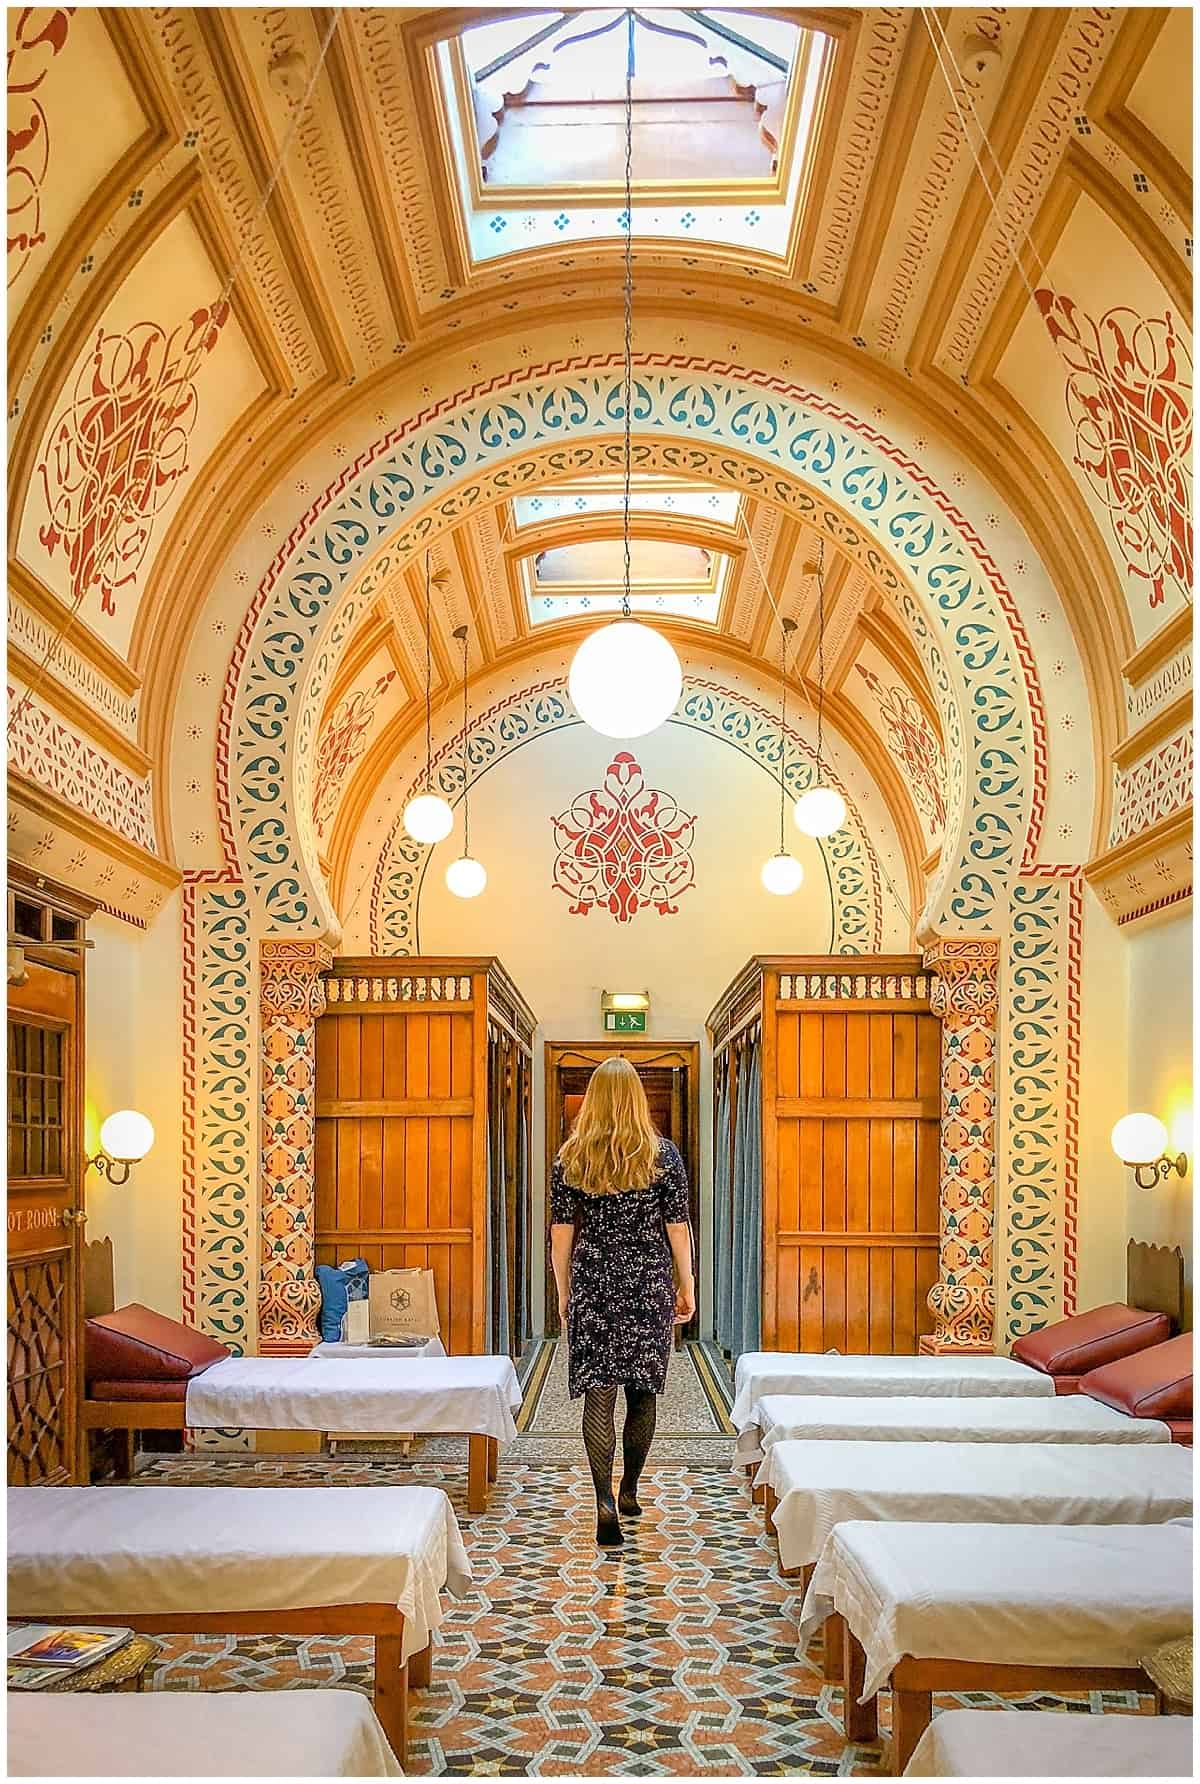 Things to do in Harrogate, the Turkish Baths